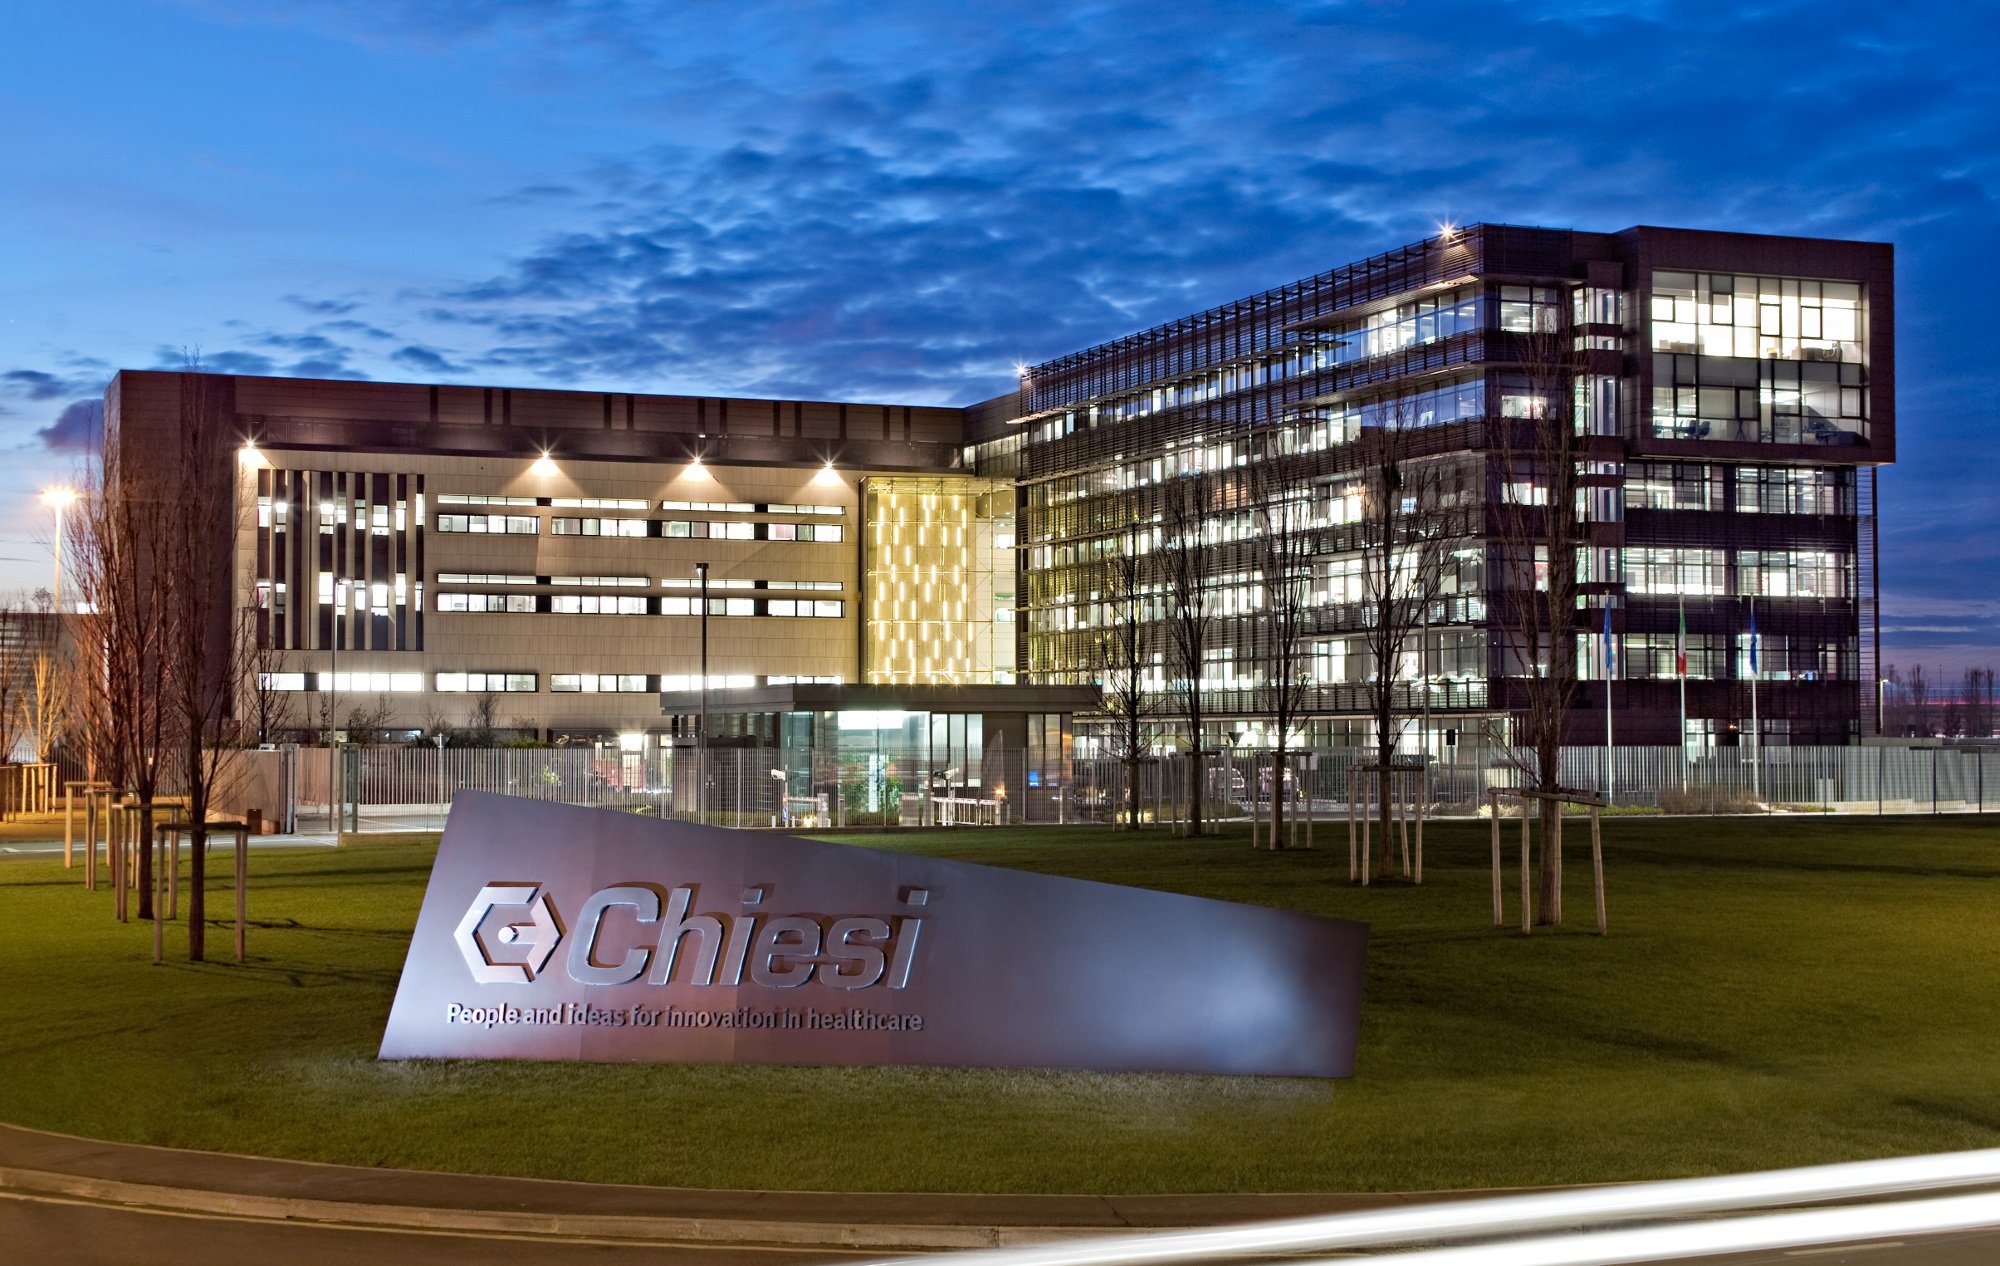 Chiesi survey shows how Fabry drugs are failing patients, providing road map for ousting incumbents